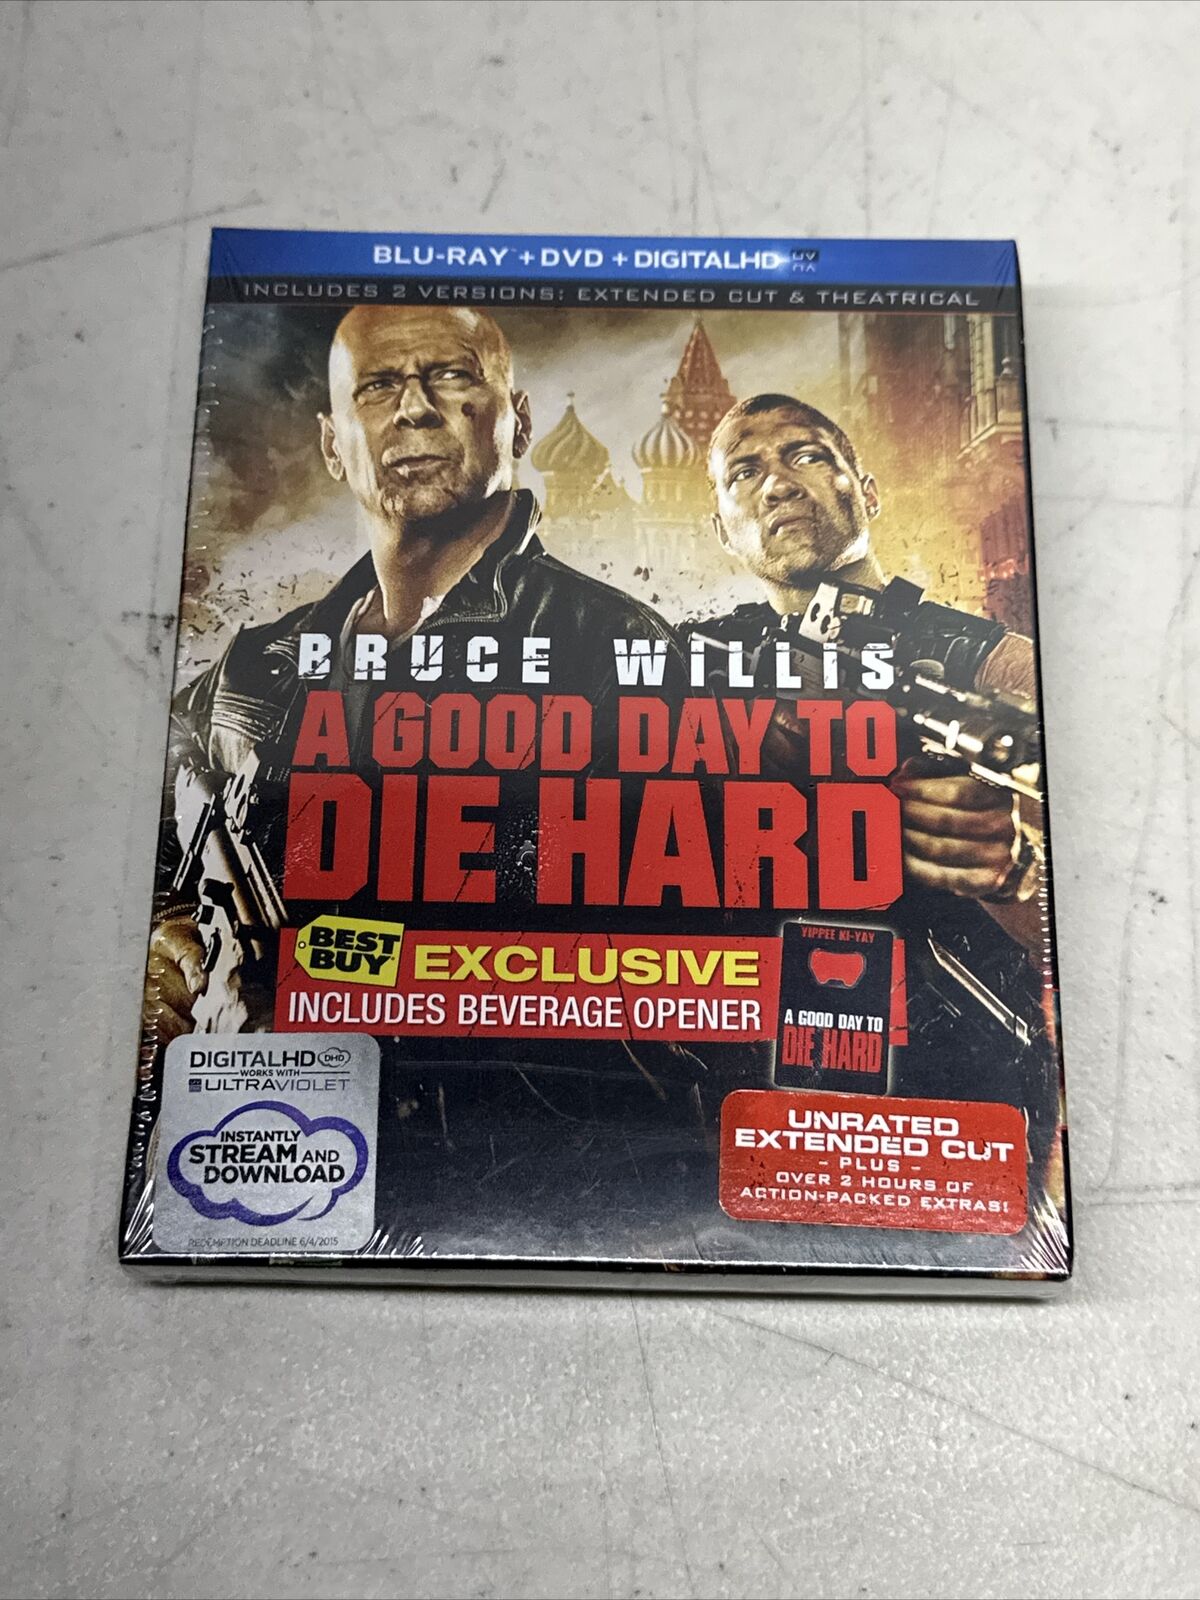 A Good Day To Die Hard (Extended Cut)